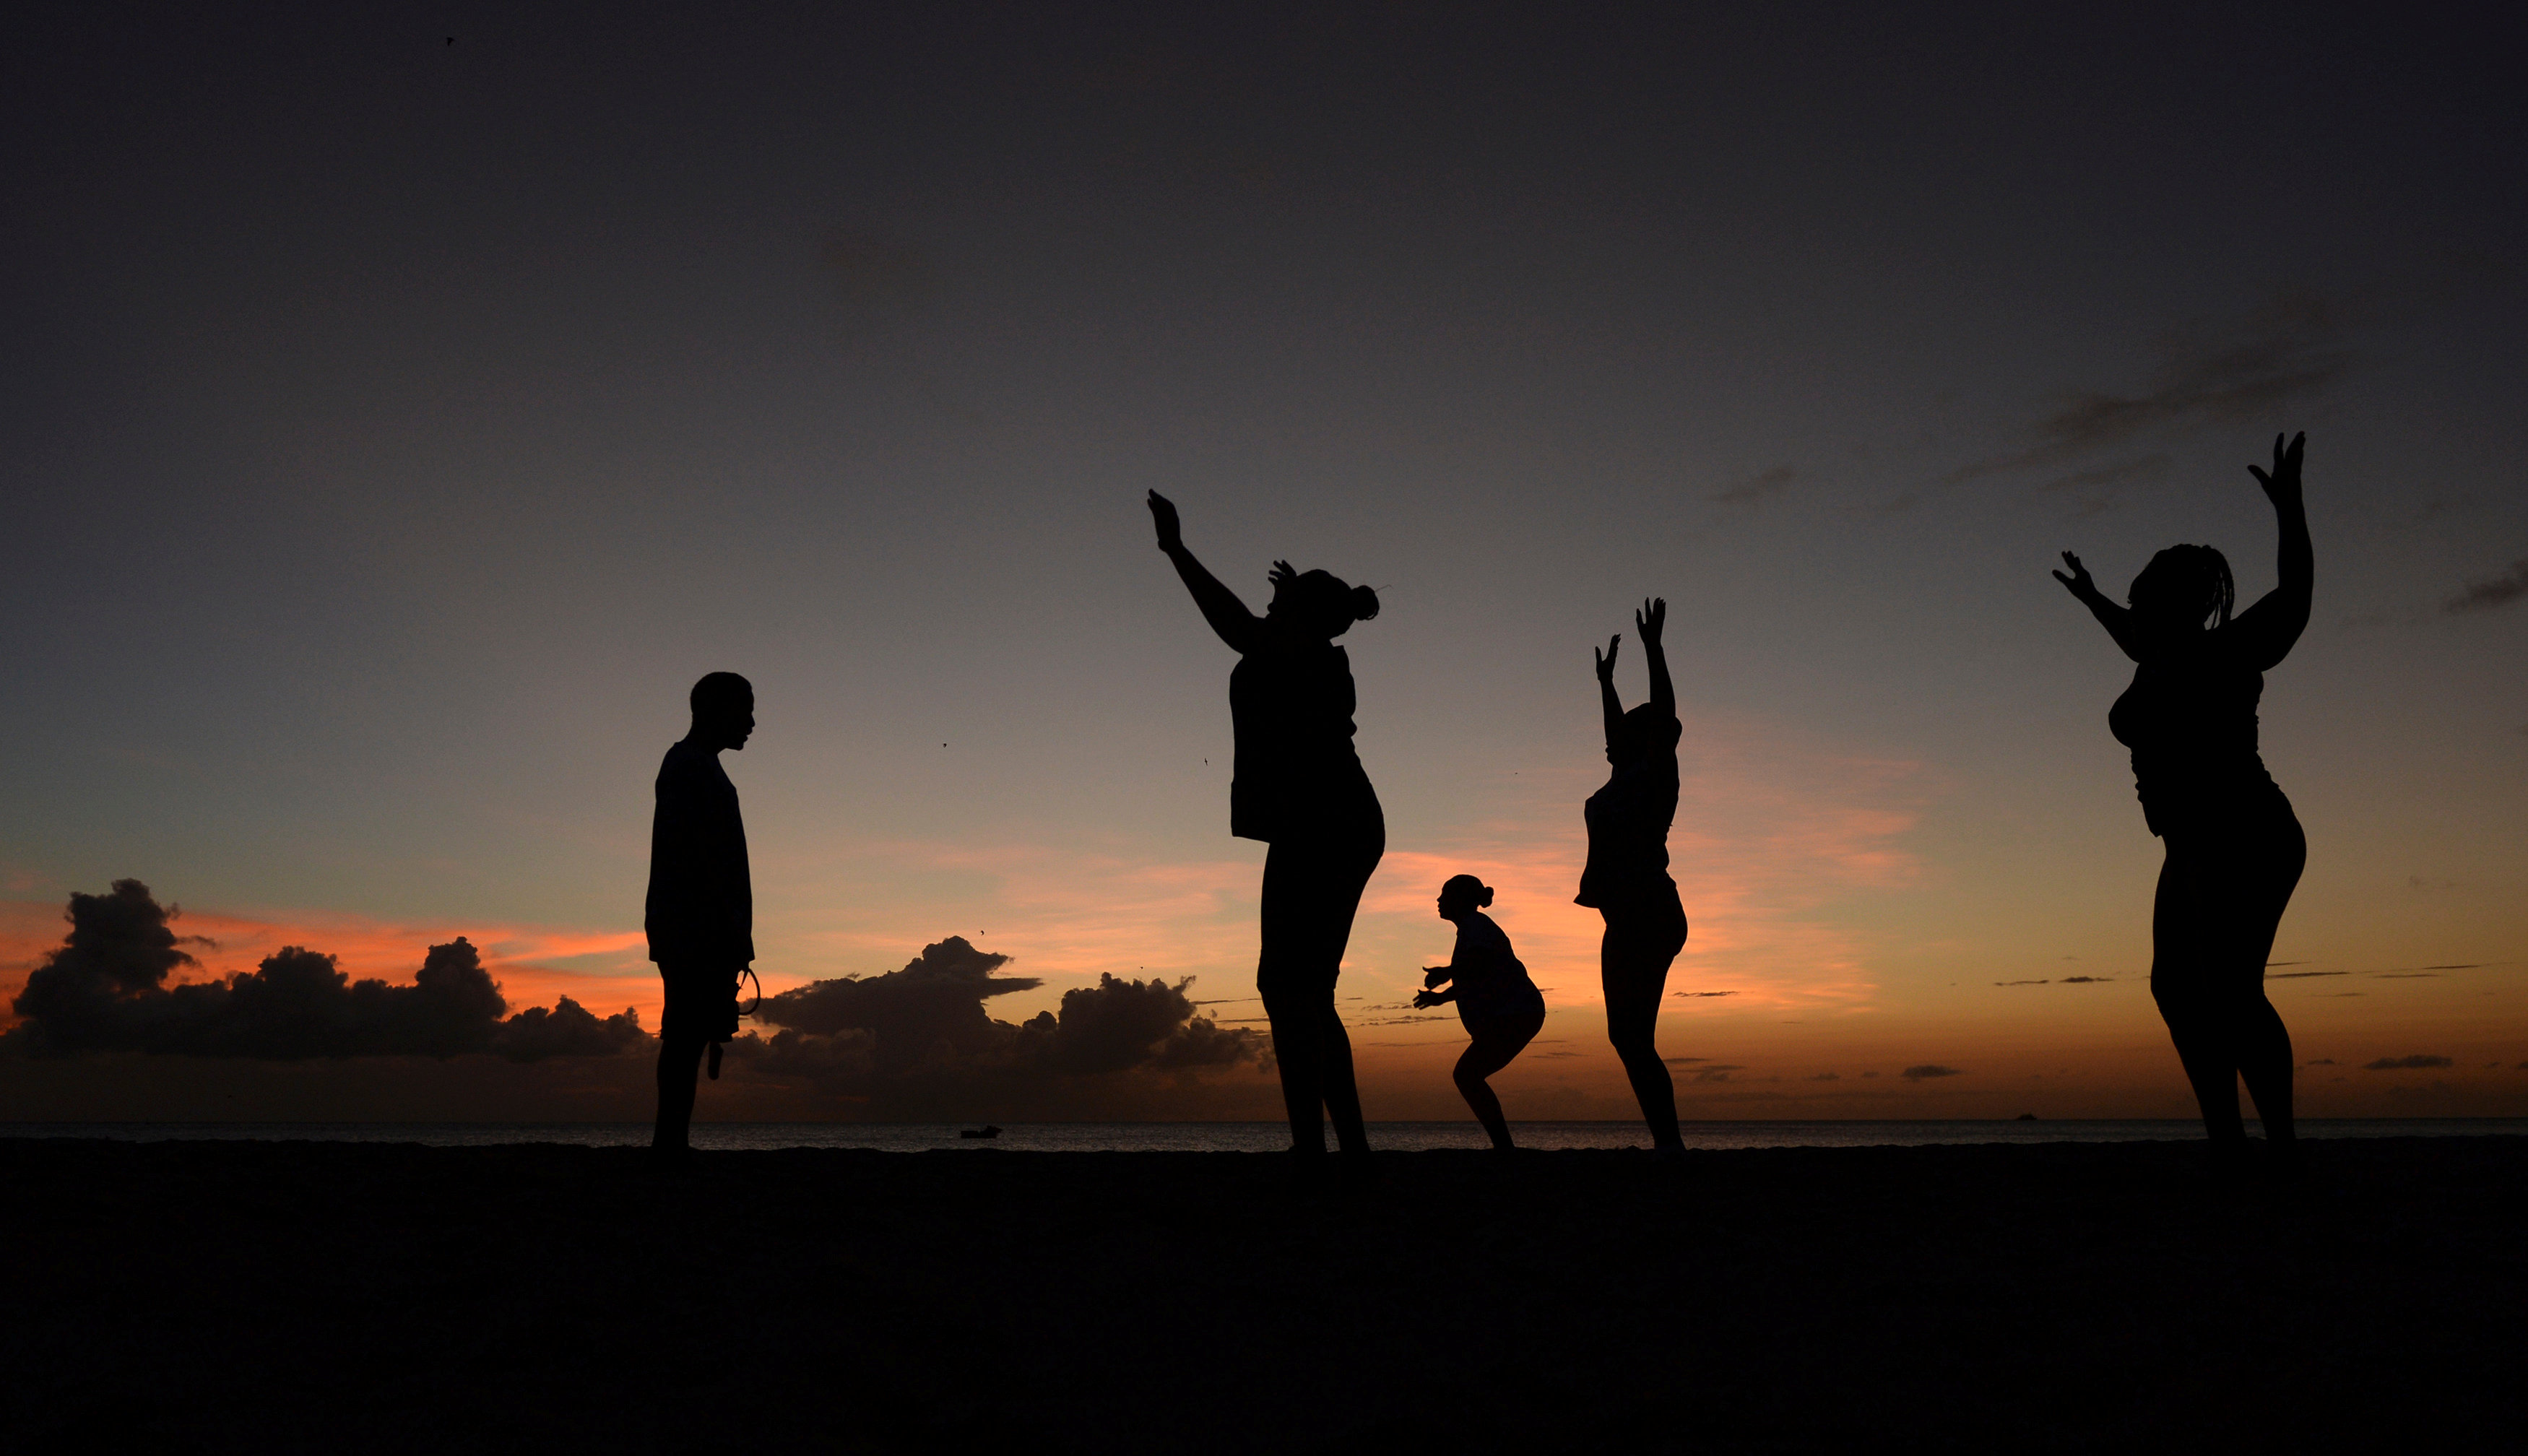 Women exercise in front of a trainer (L) as the sun sets near Kensington Oval in Bridgetown, Barbados March 13, 2014. REUTERS/Philip Brown/File Photo